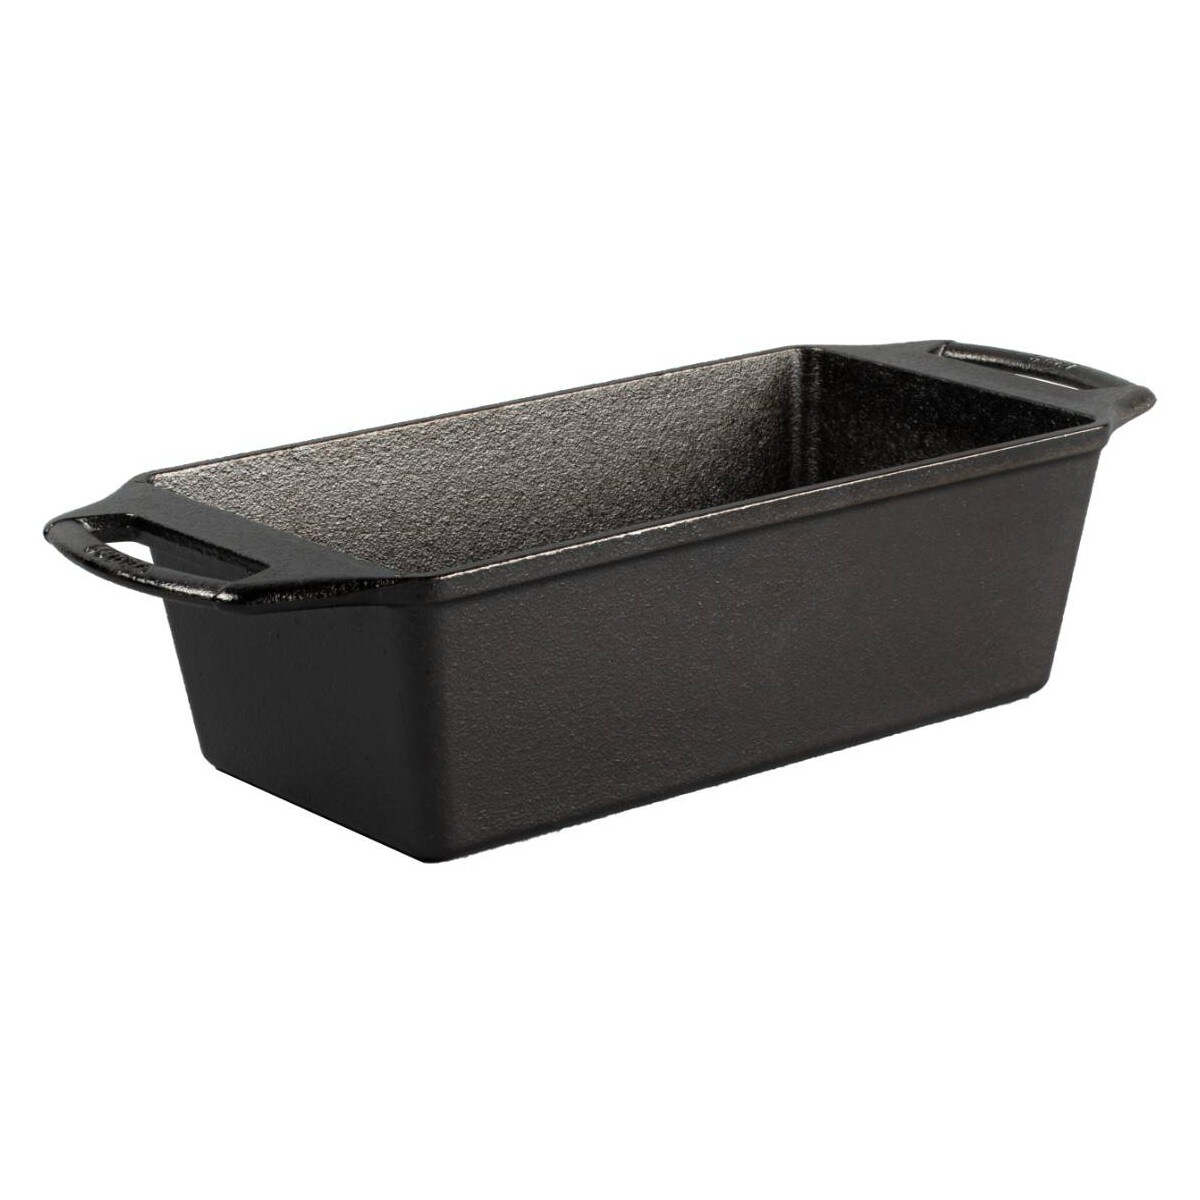 Lodge Cast Iron Loaf Baking Pan Seasoned Dual Handles with Grips 8.5 x 4.5